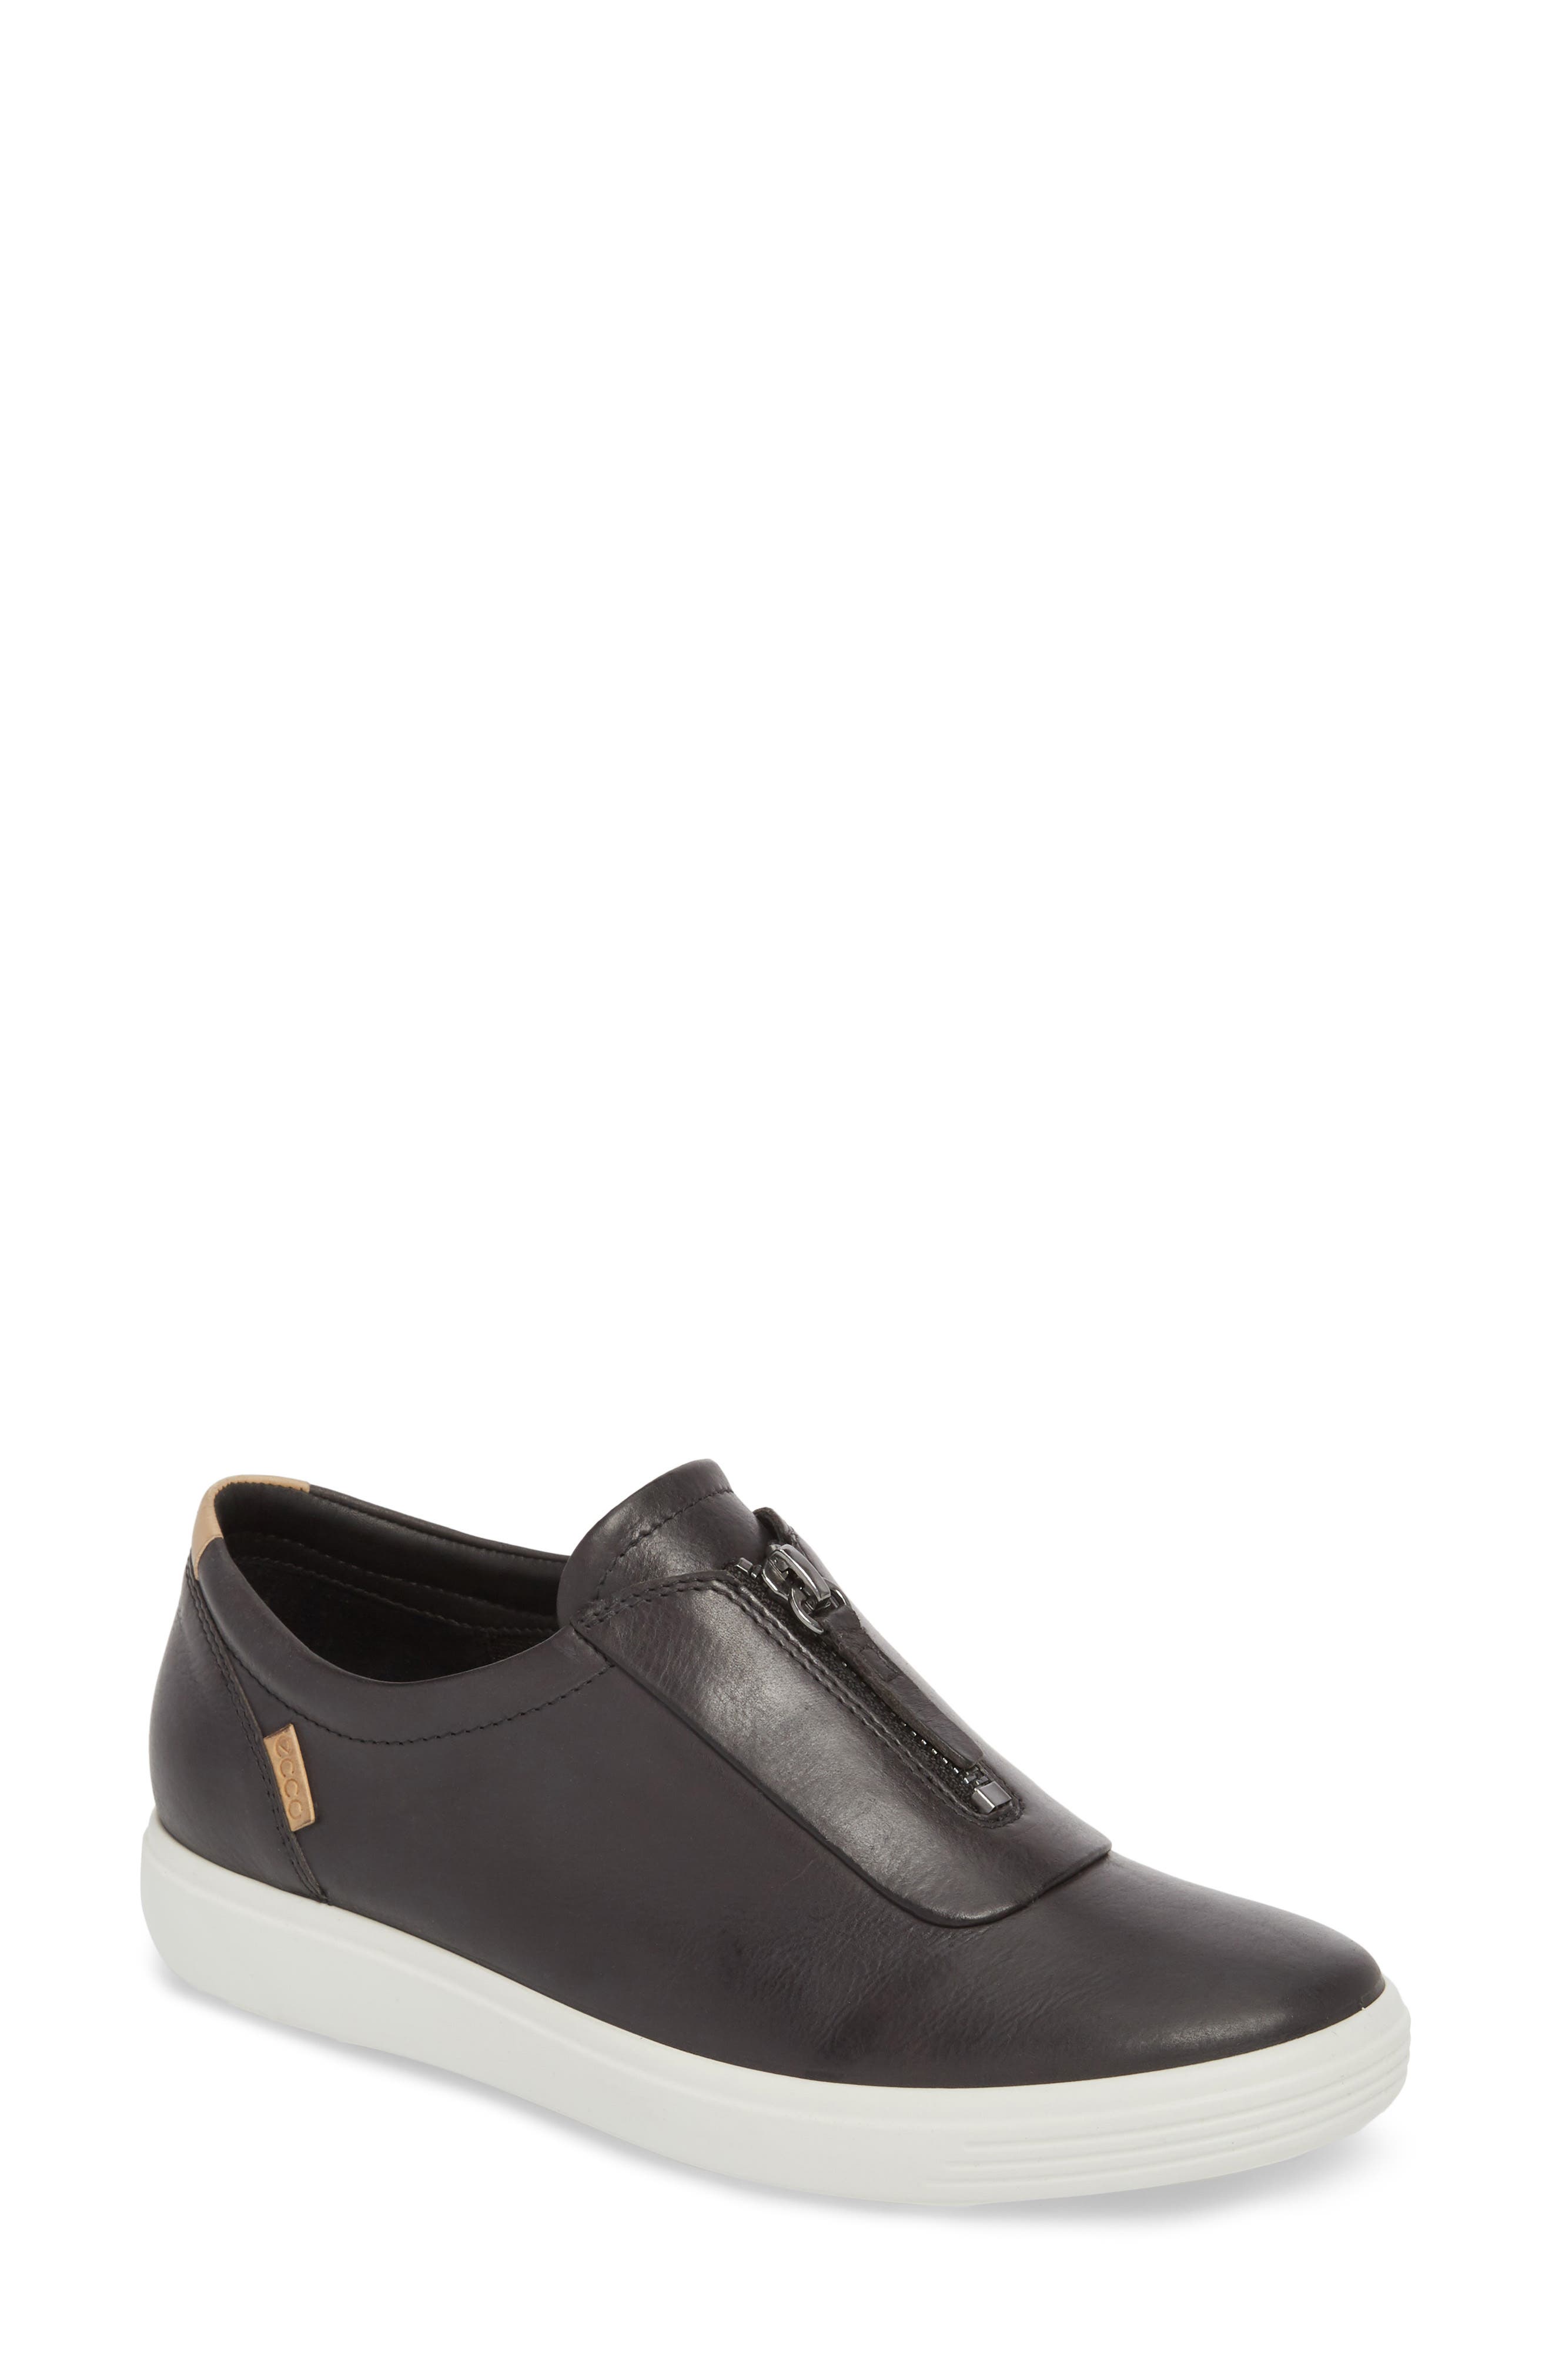 nordstrom ecco womens shoes